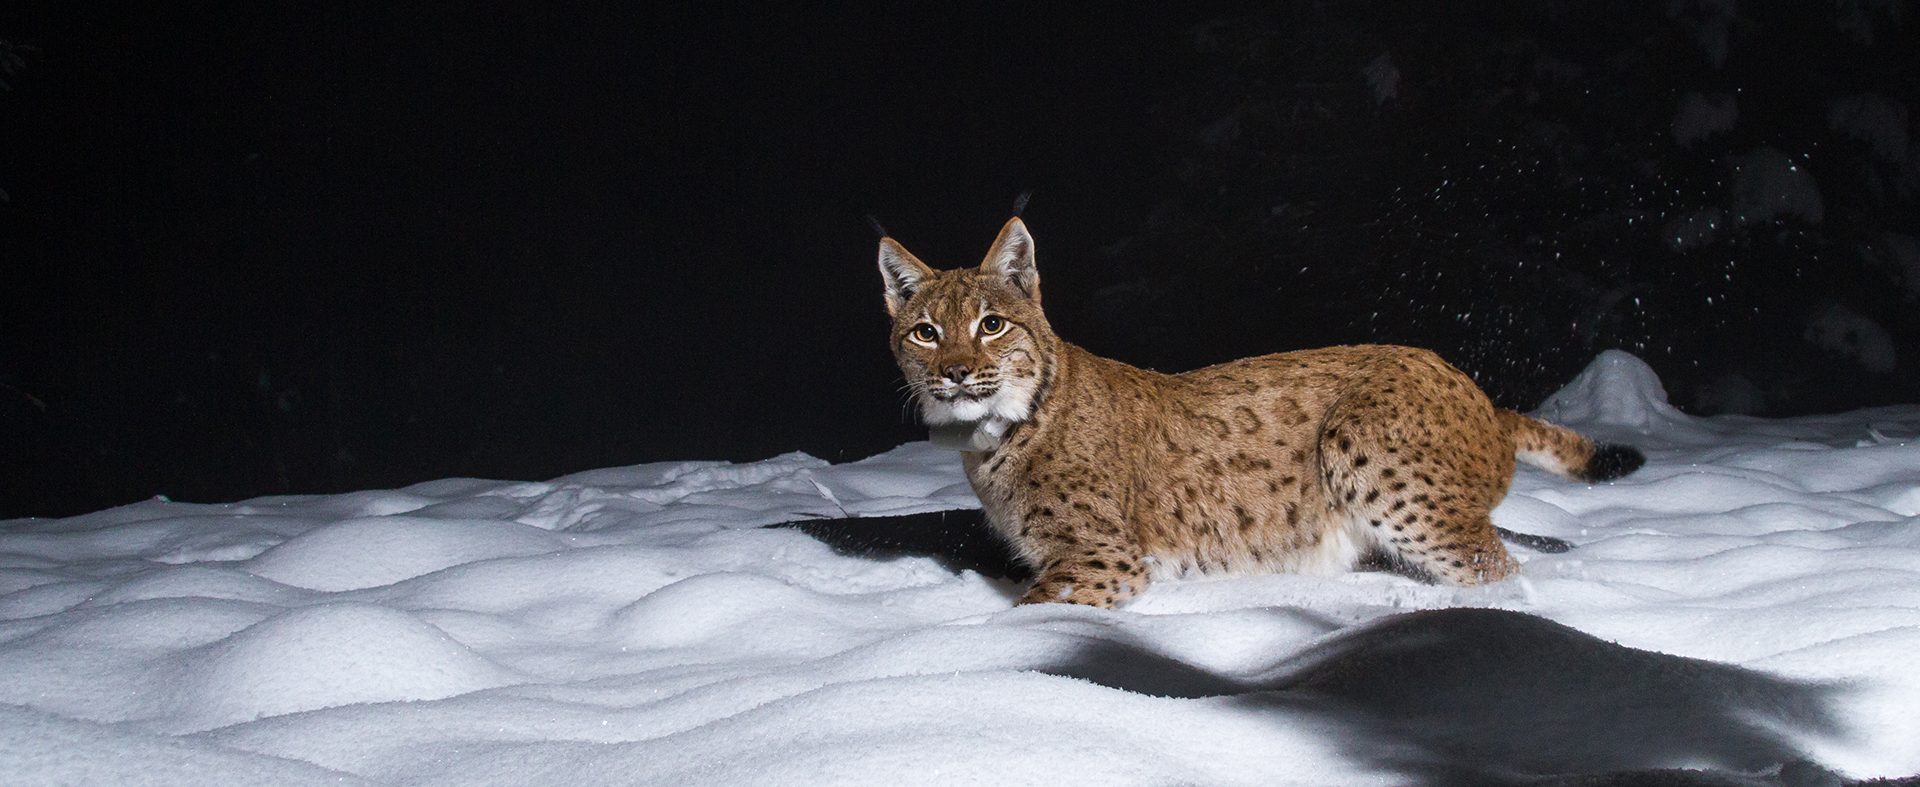 The Living on the Edge project came about due to the scarcity of brown bears, wolves and Eurasian lynx in Austria.